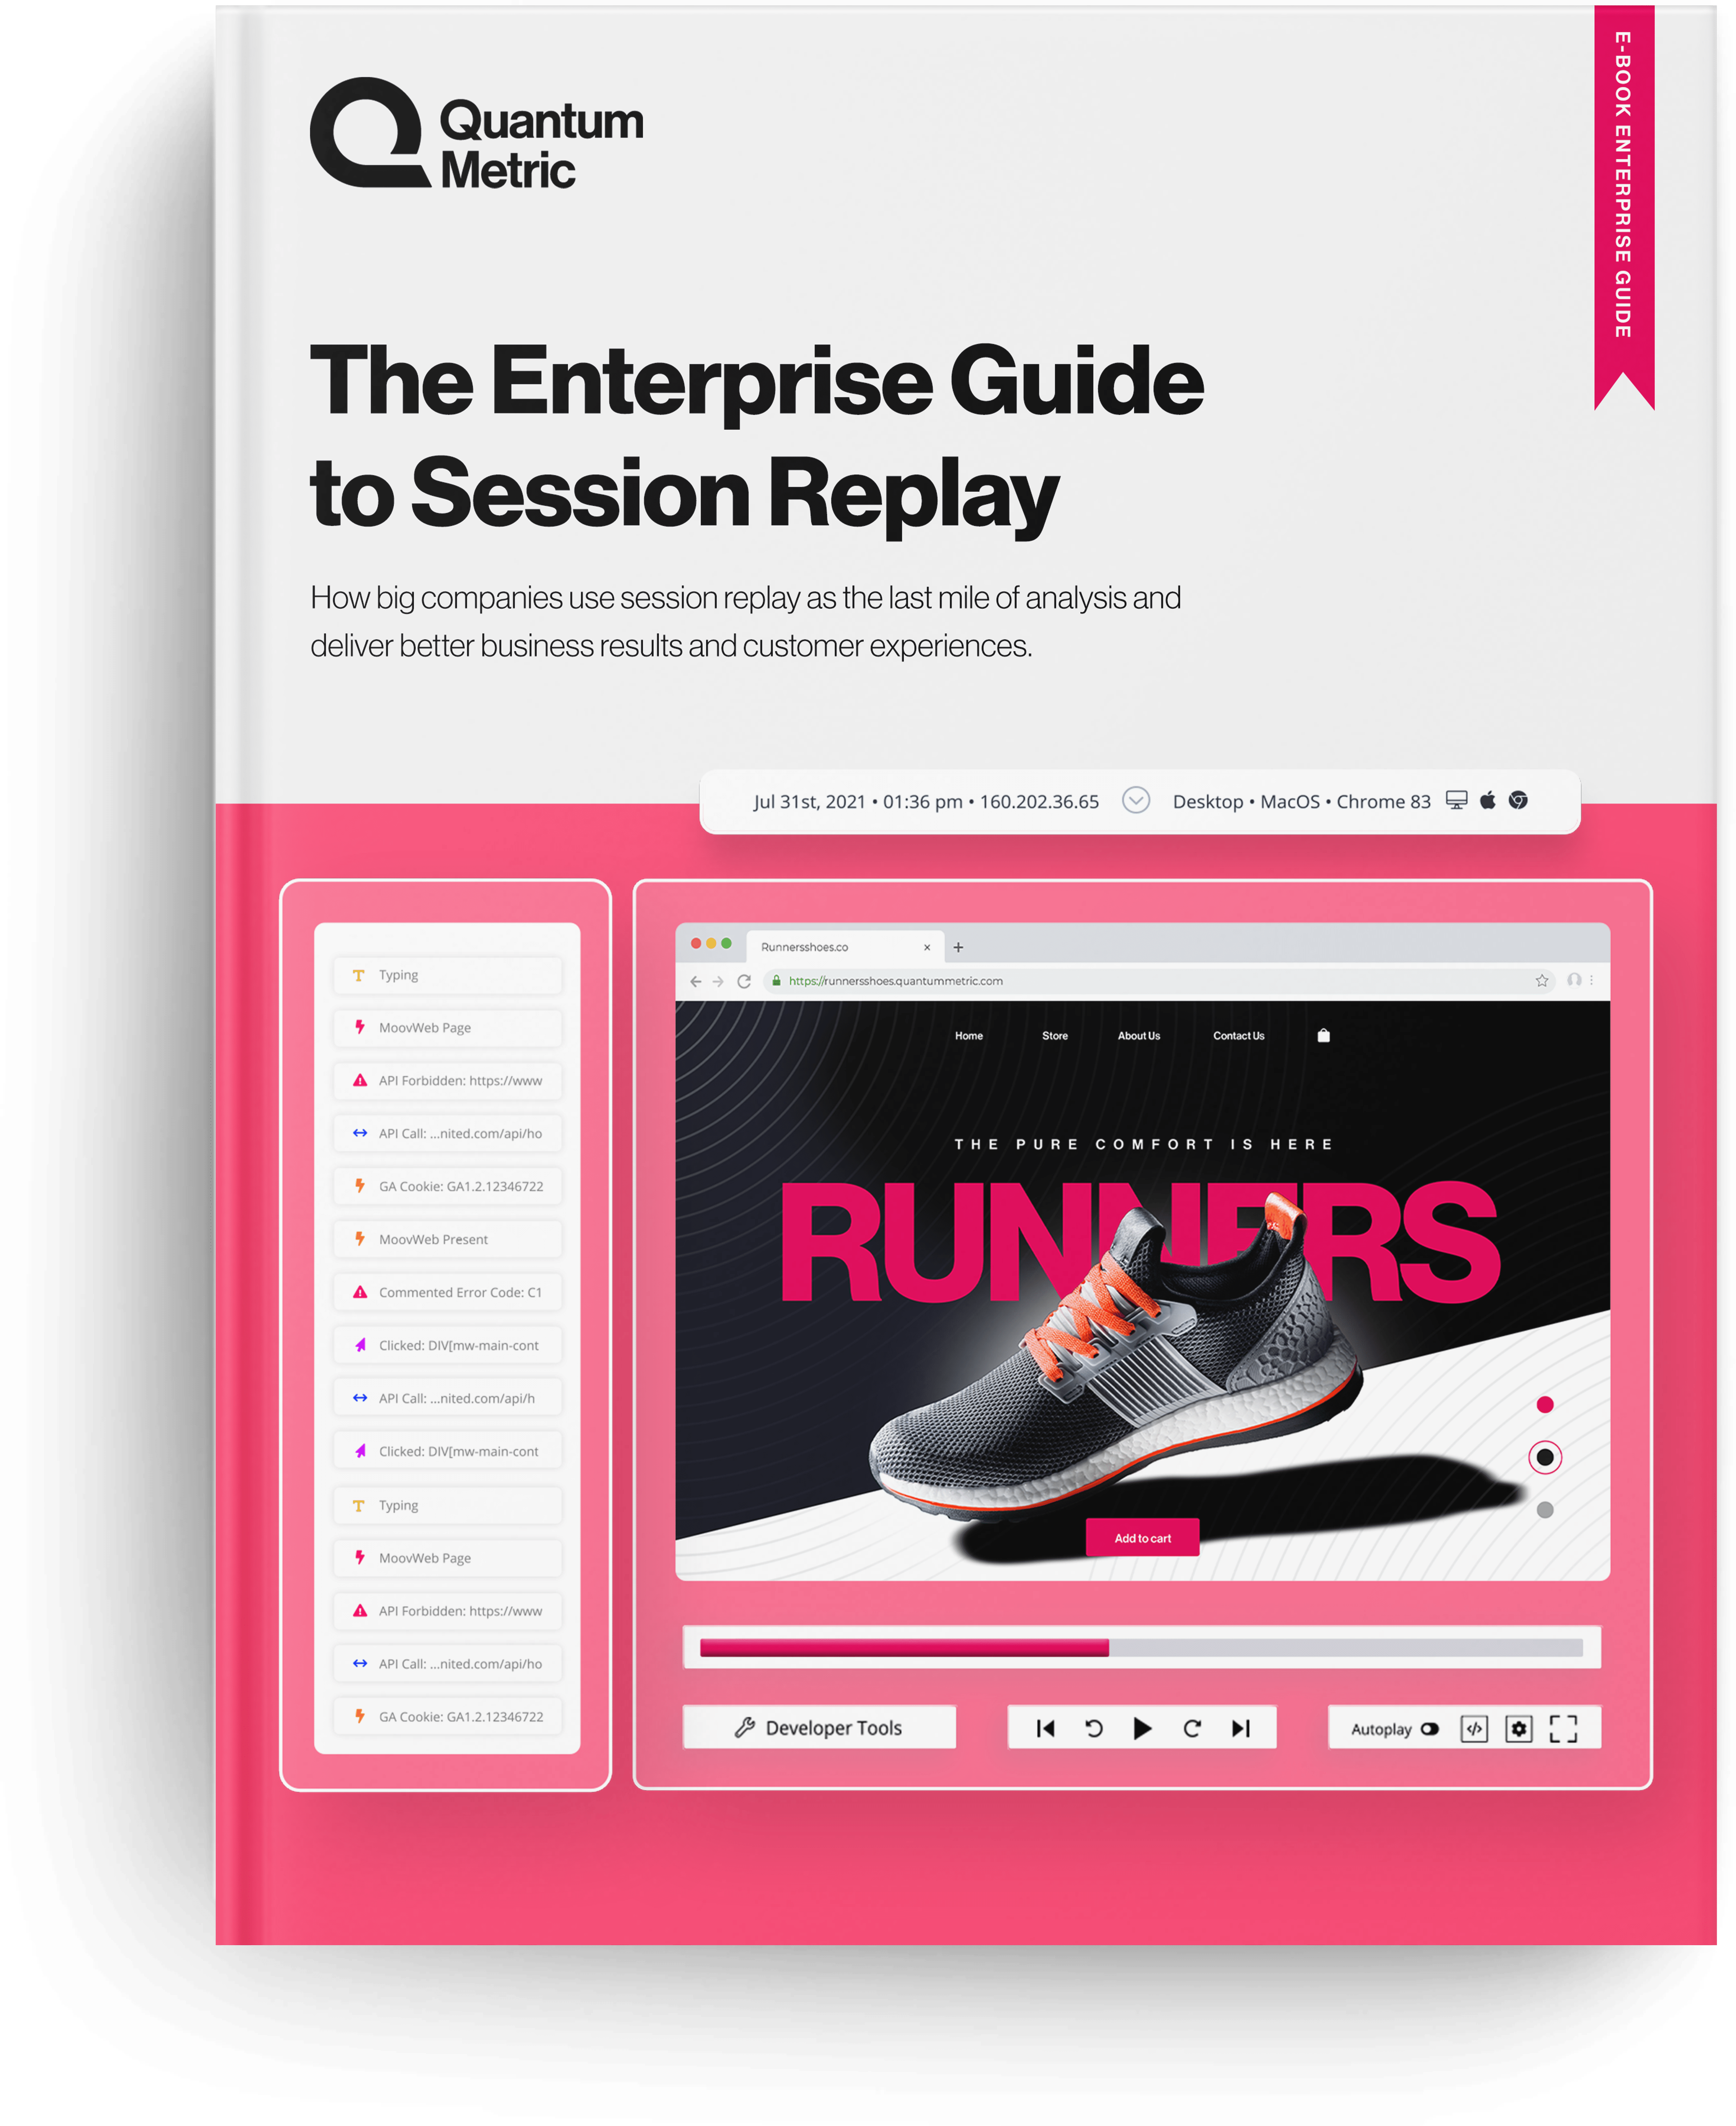 The Enterprise Guide to Session Replay eBook cover